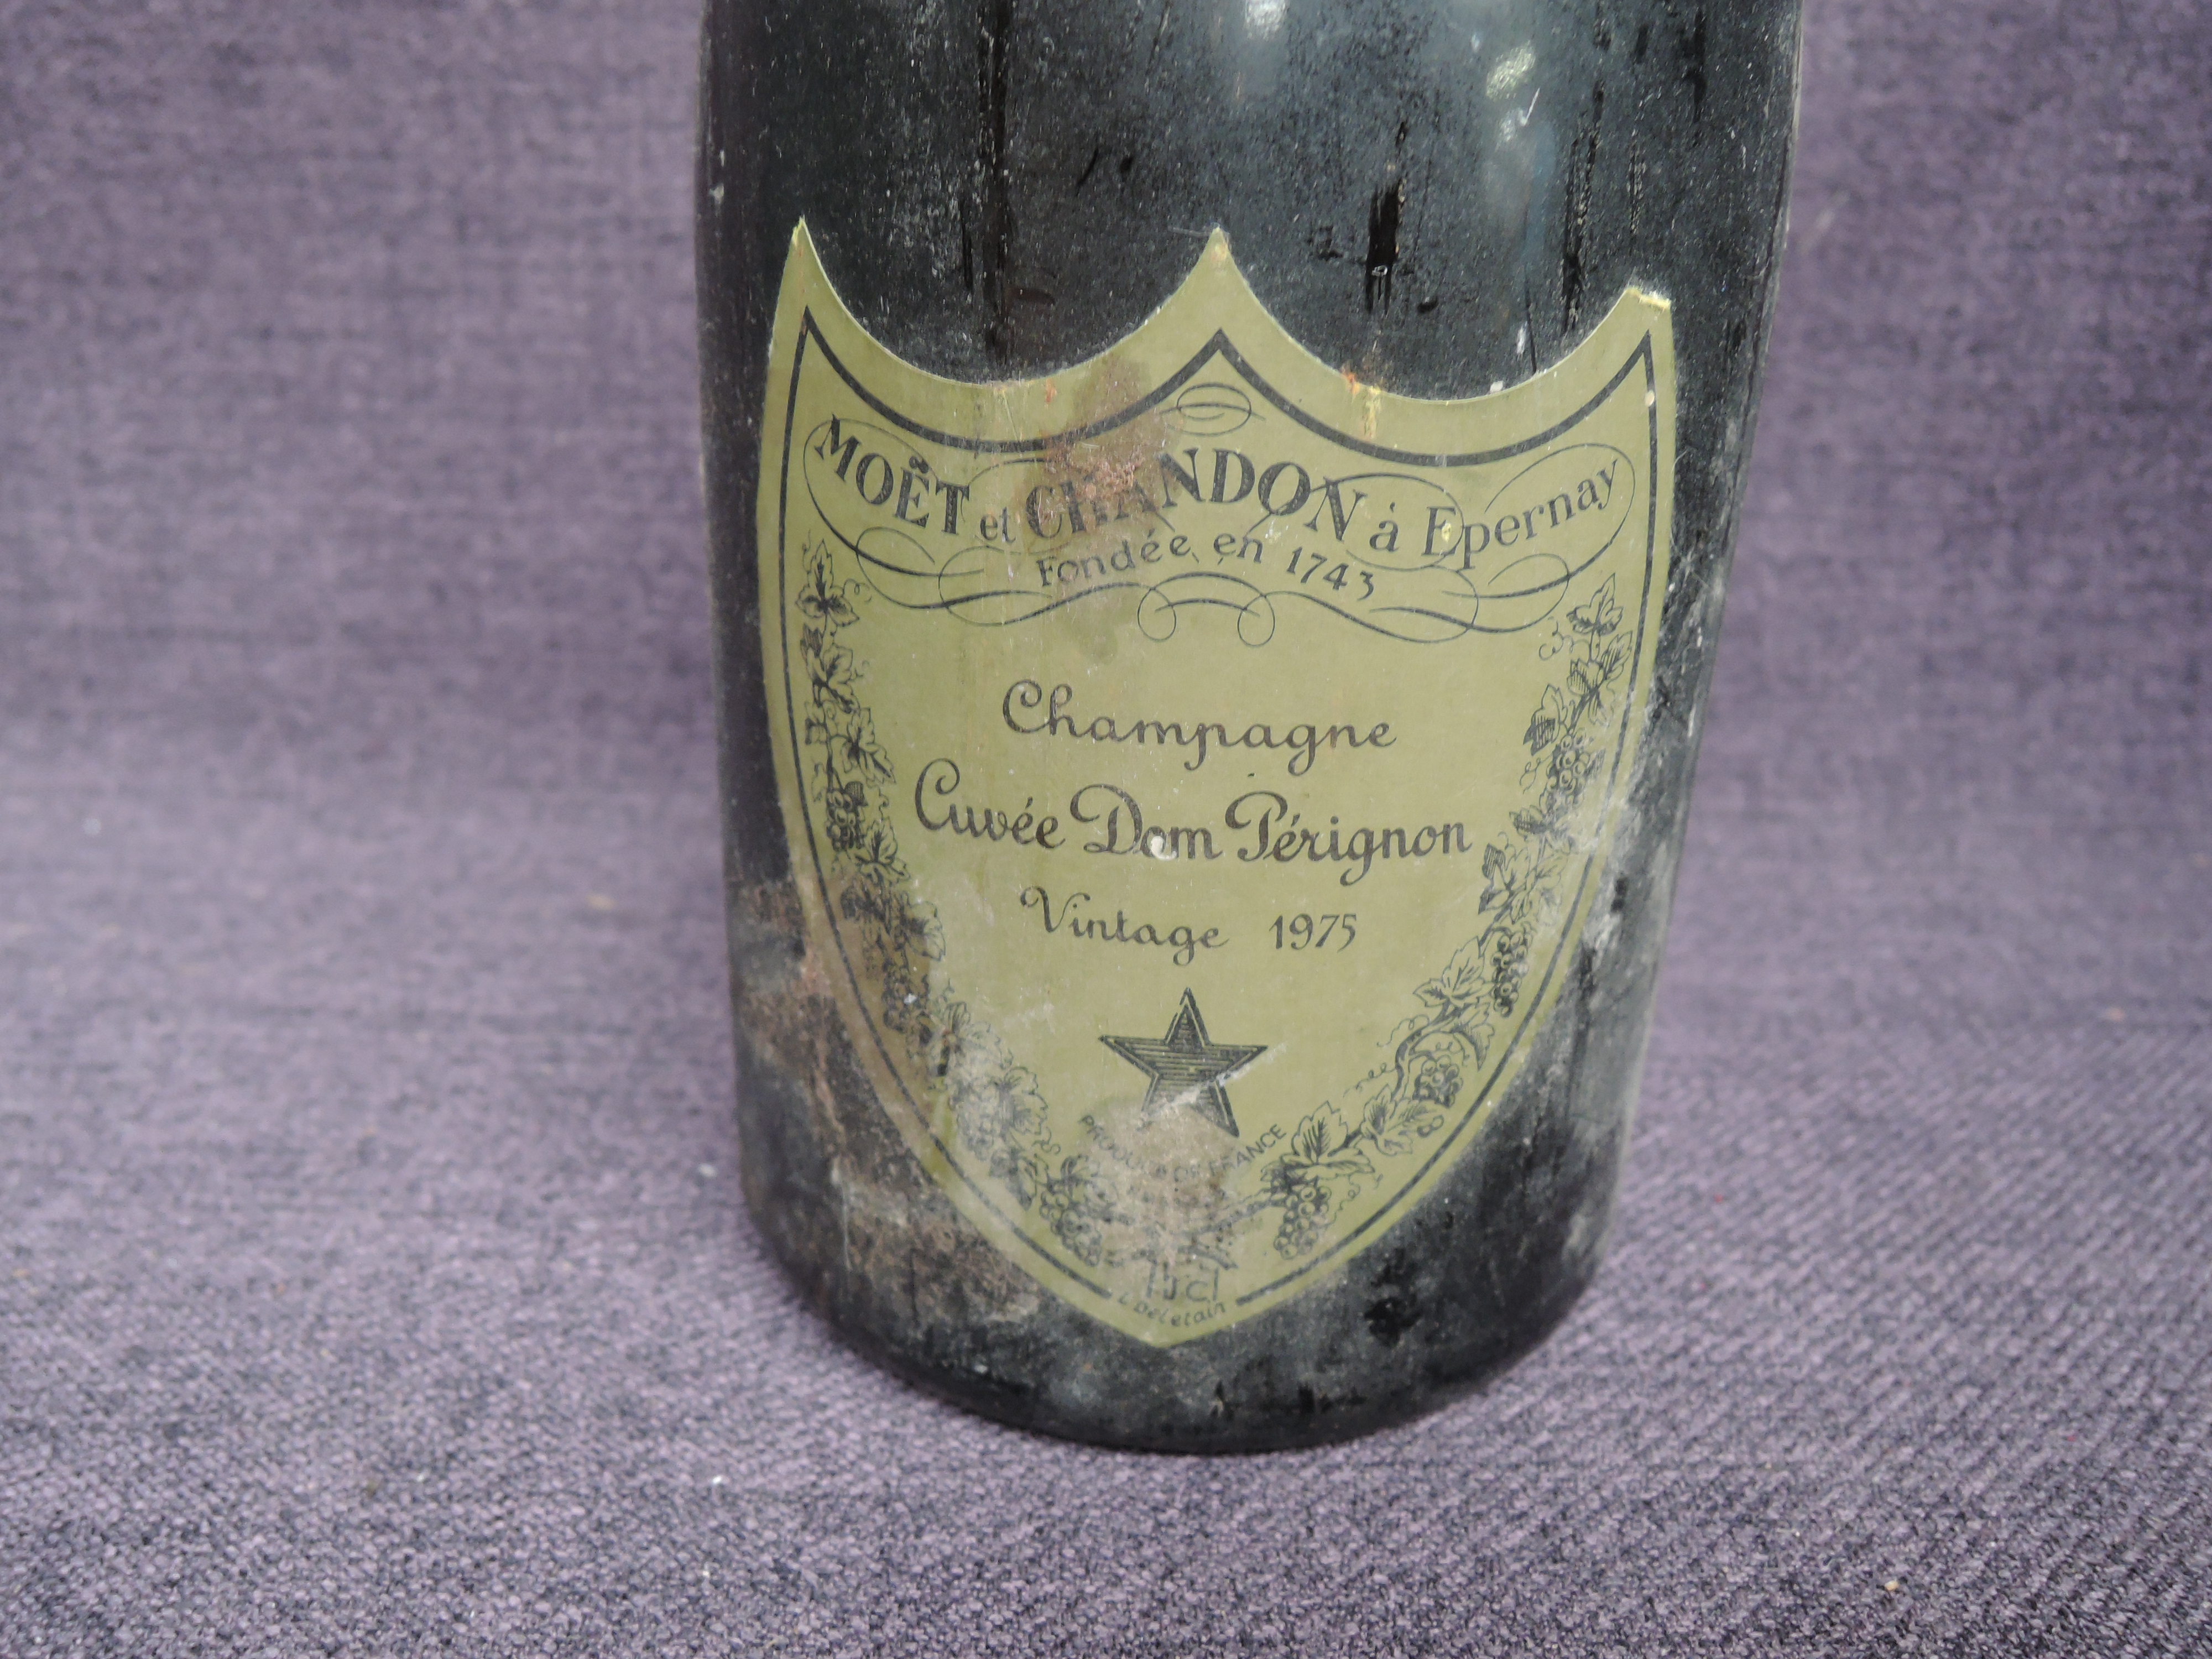 A bottle of Moet Chandon Champagne Cuvee Dom Perignon Vintage 1975, no strength or capacity stated - Image 5 of 5